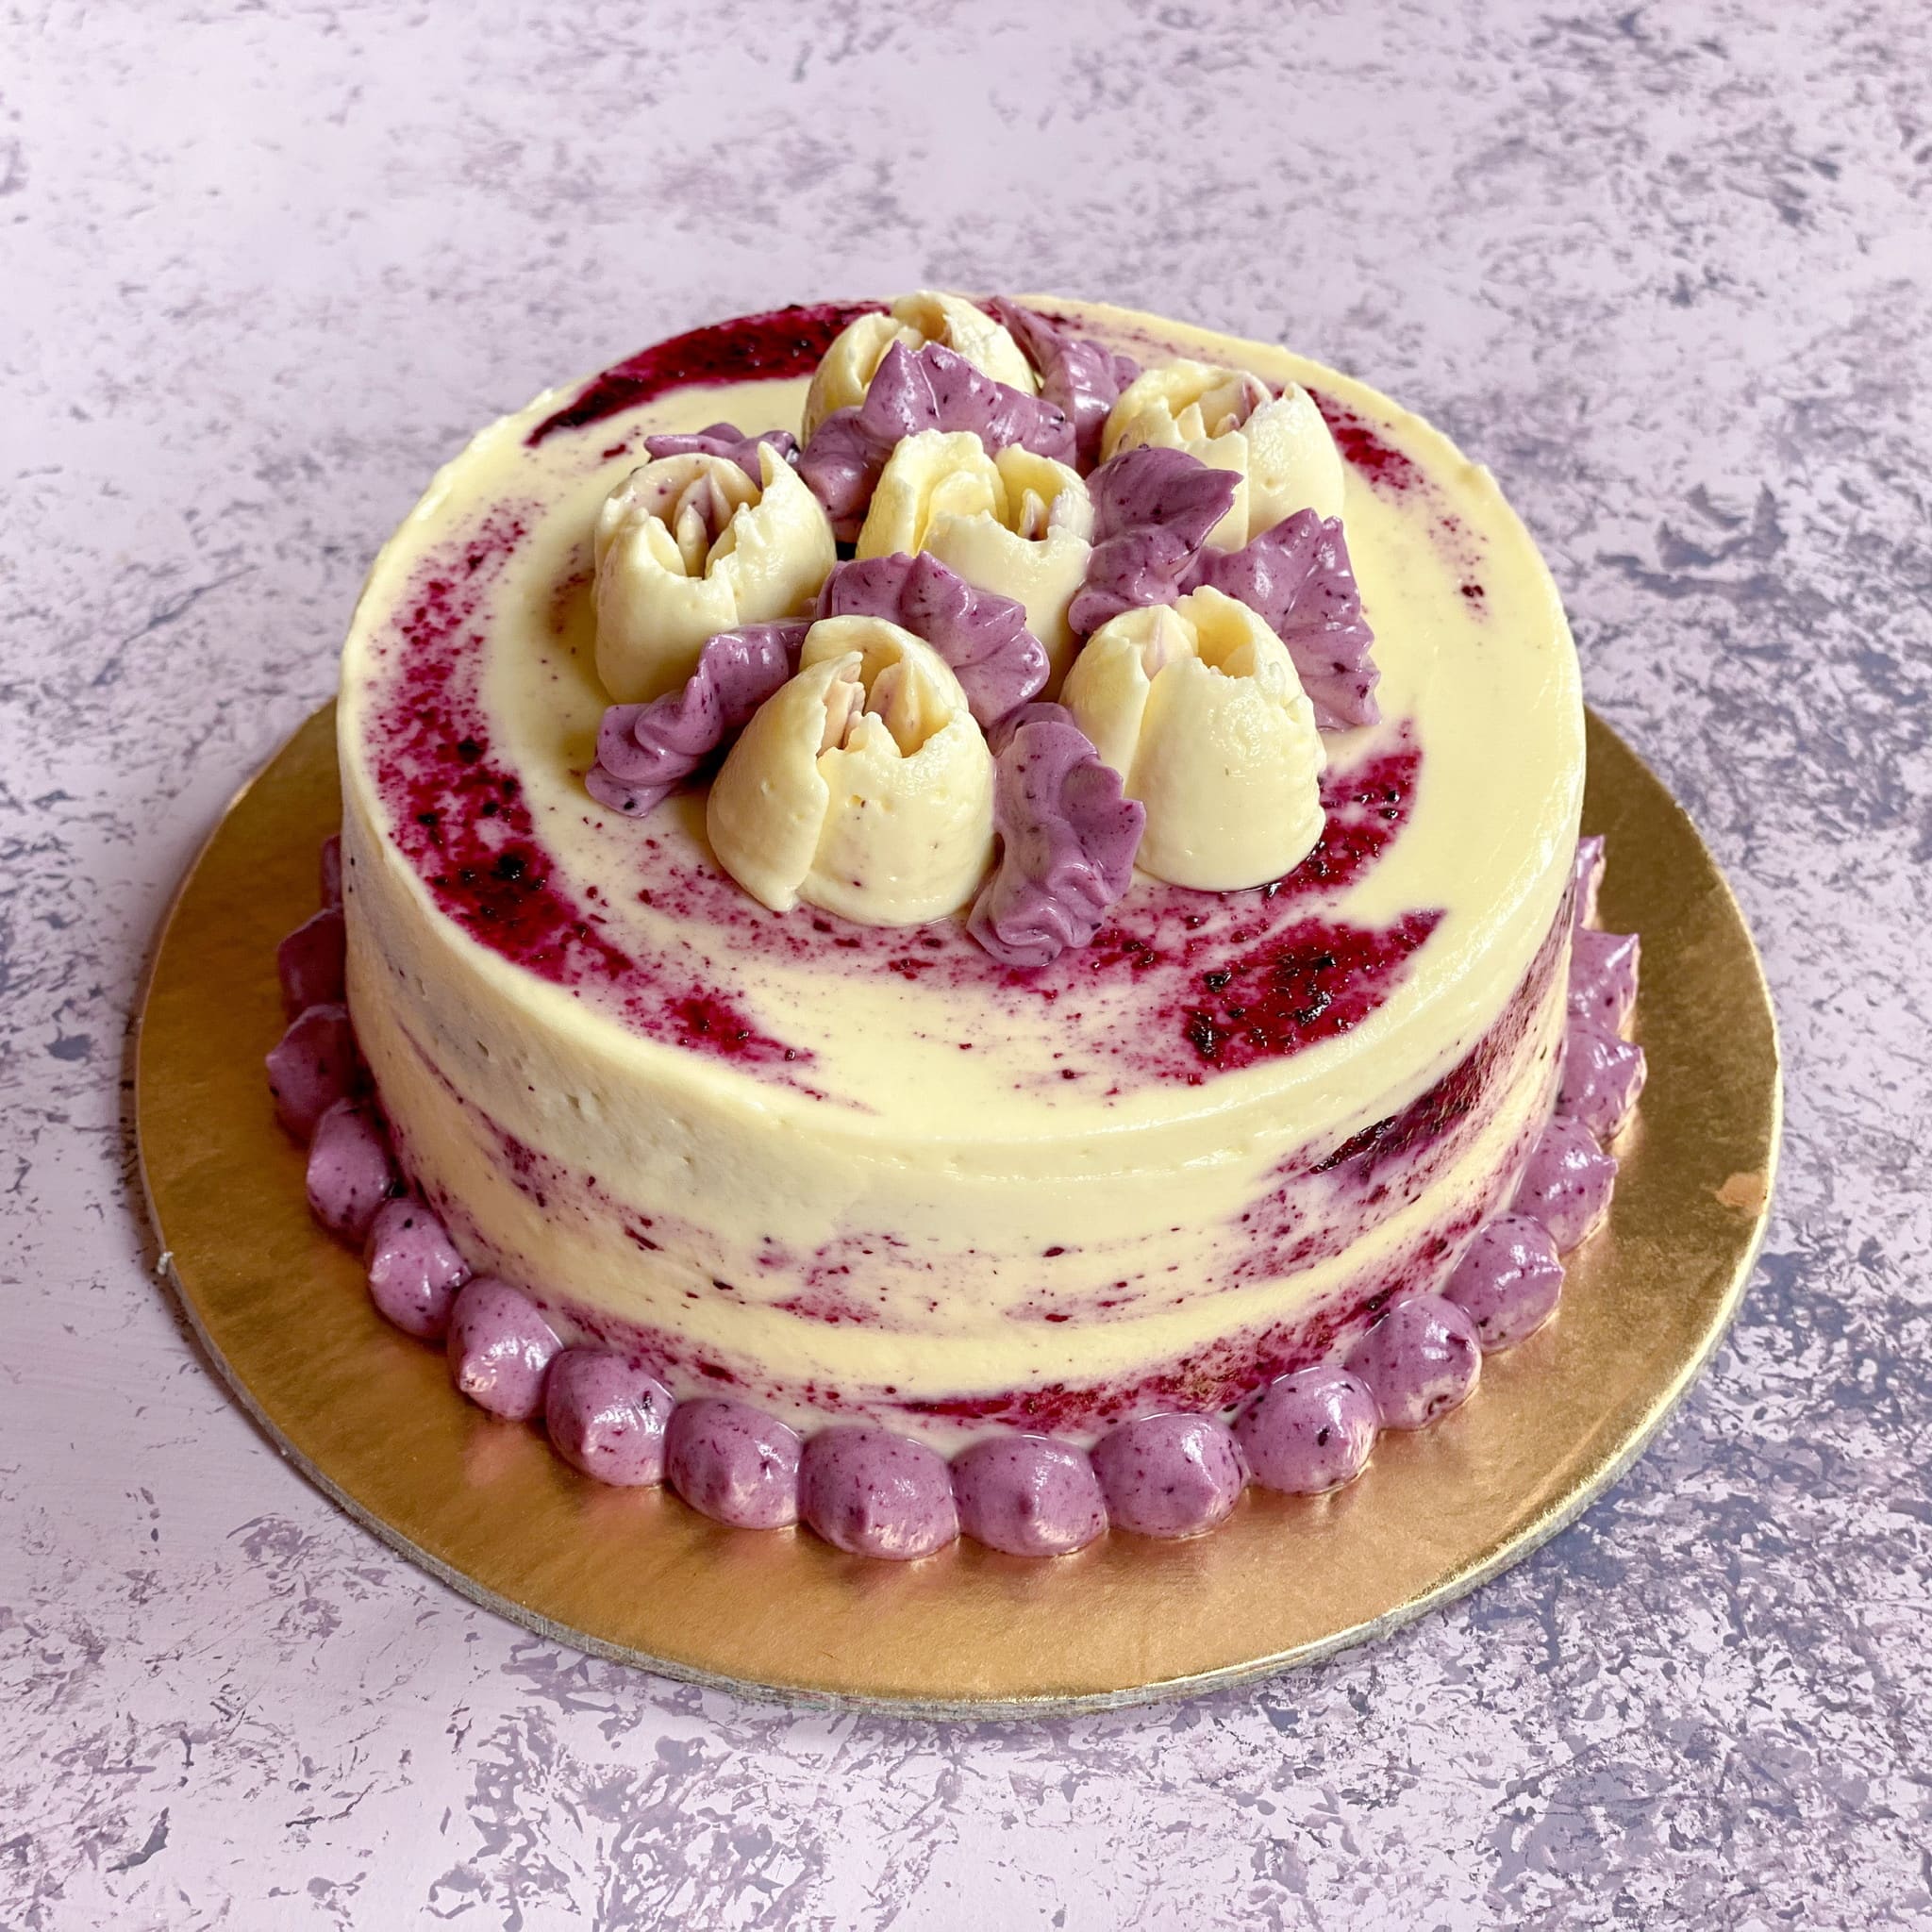 Mrs. Magpie - Make your everyday a little more special with our new  miniature 3 tiered triple delight cake. It has our signature sweet and  salty chocolate flavour. They are the perfect